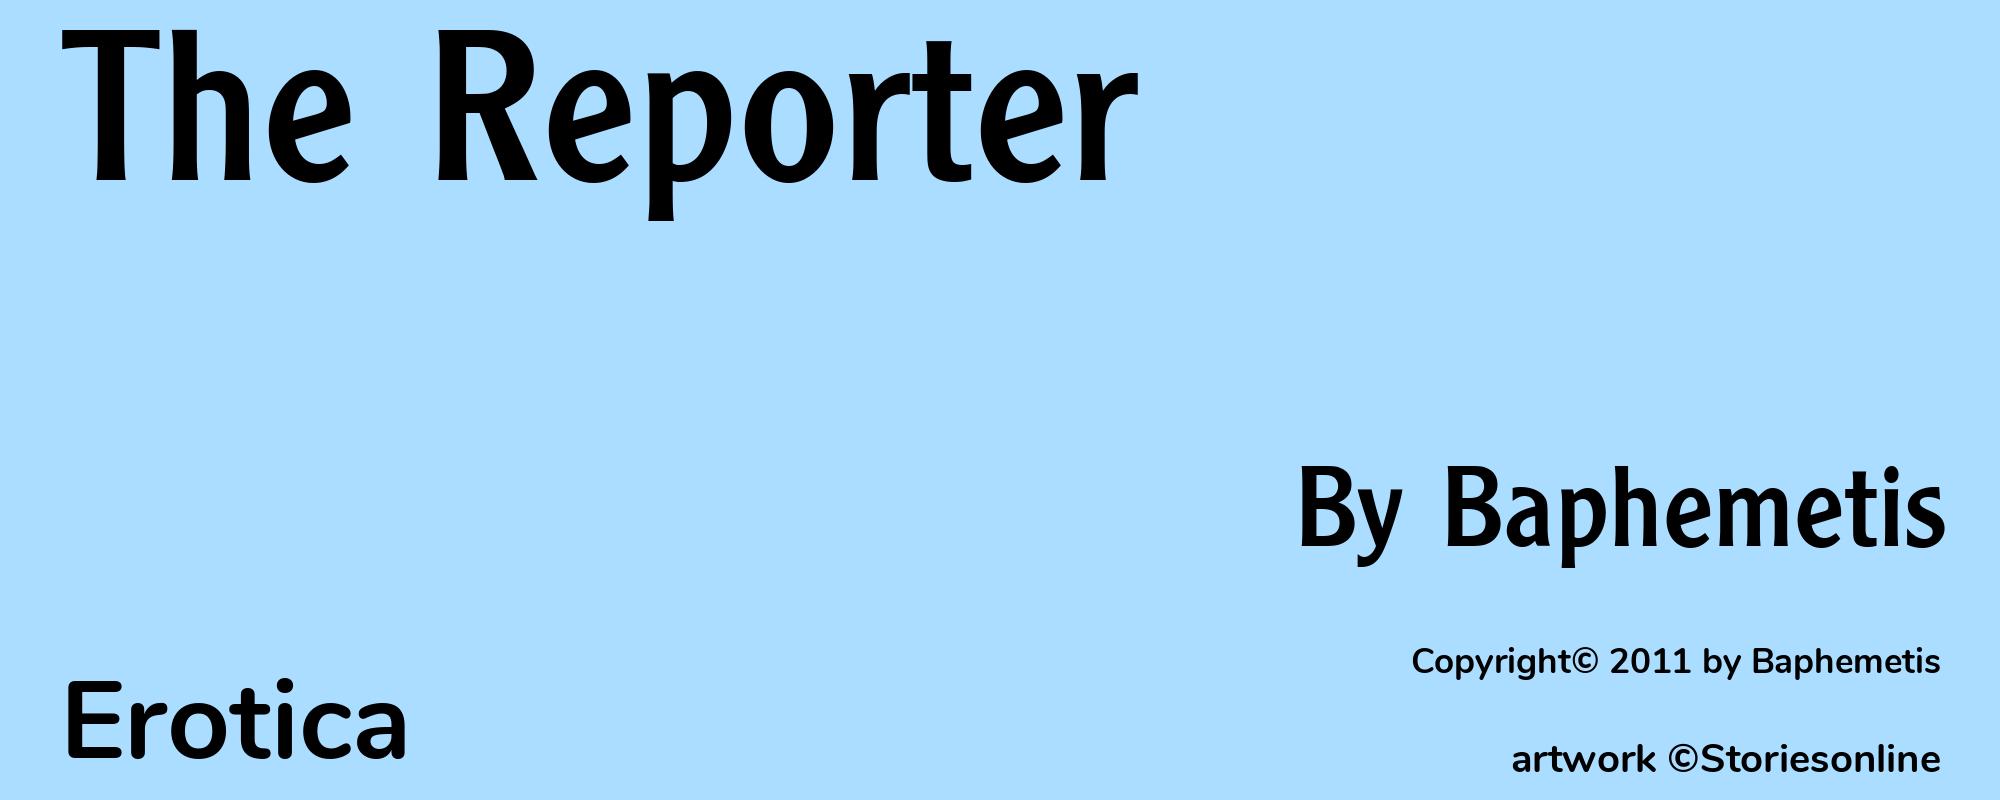 The Reporter - Cover